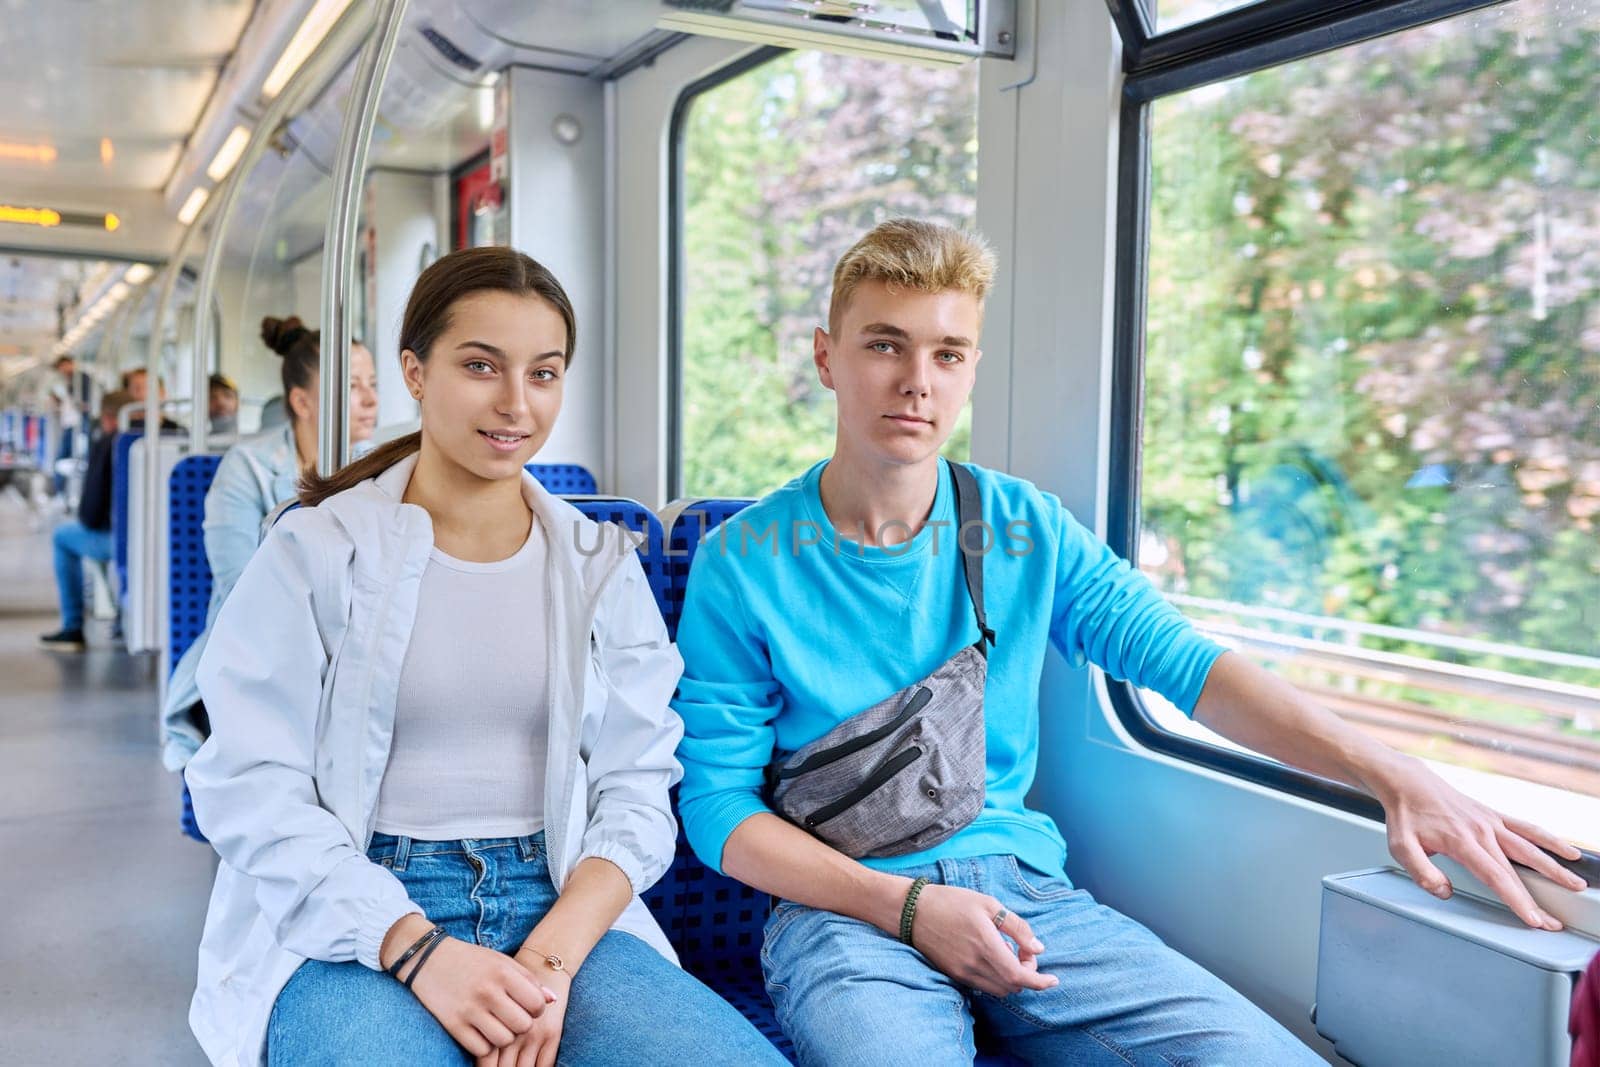 Teenage guy and girl commuter train passengers sitting together, smiling, looking at camera. Adolescence, youth, lifestyle, friendship, communication, rail transport, passenger traffic